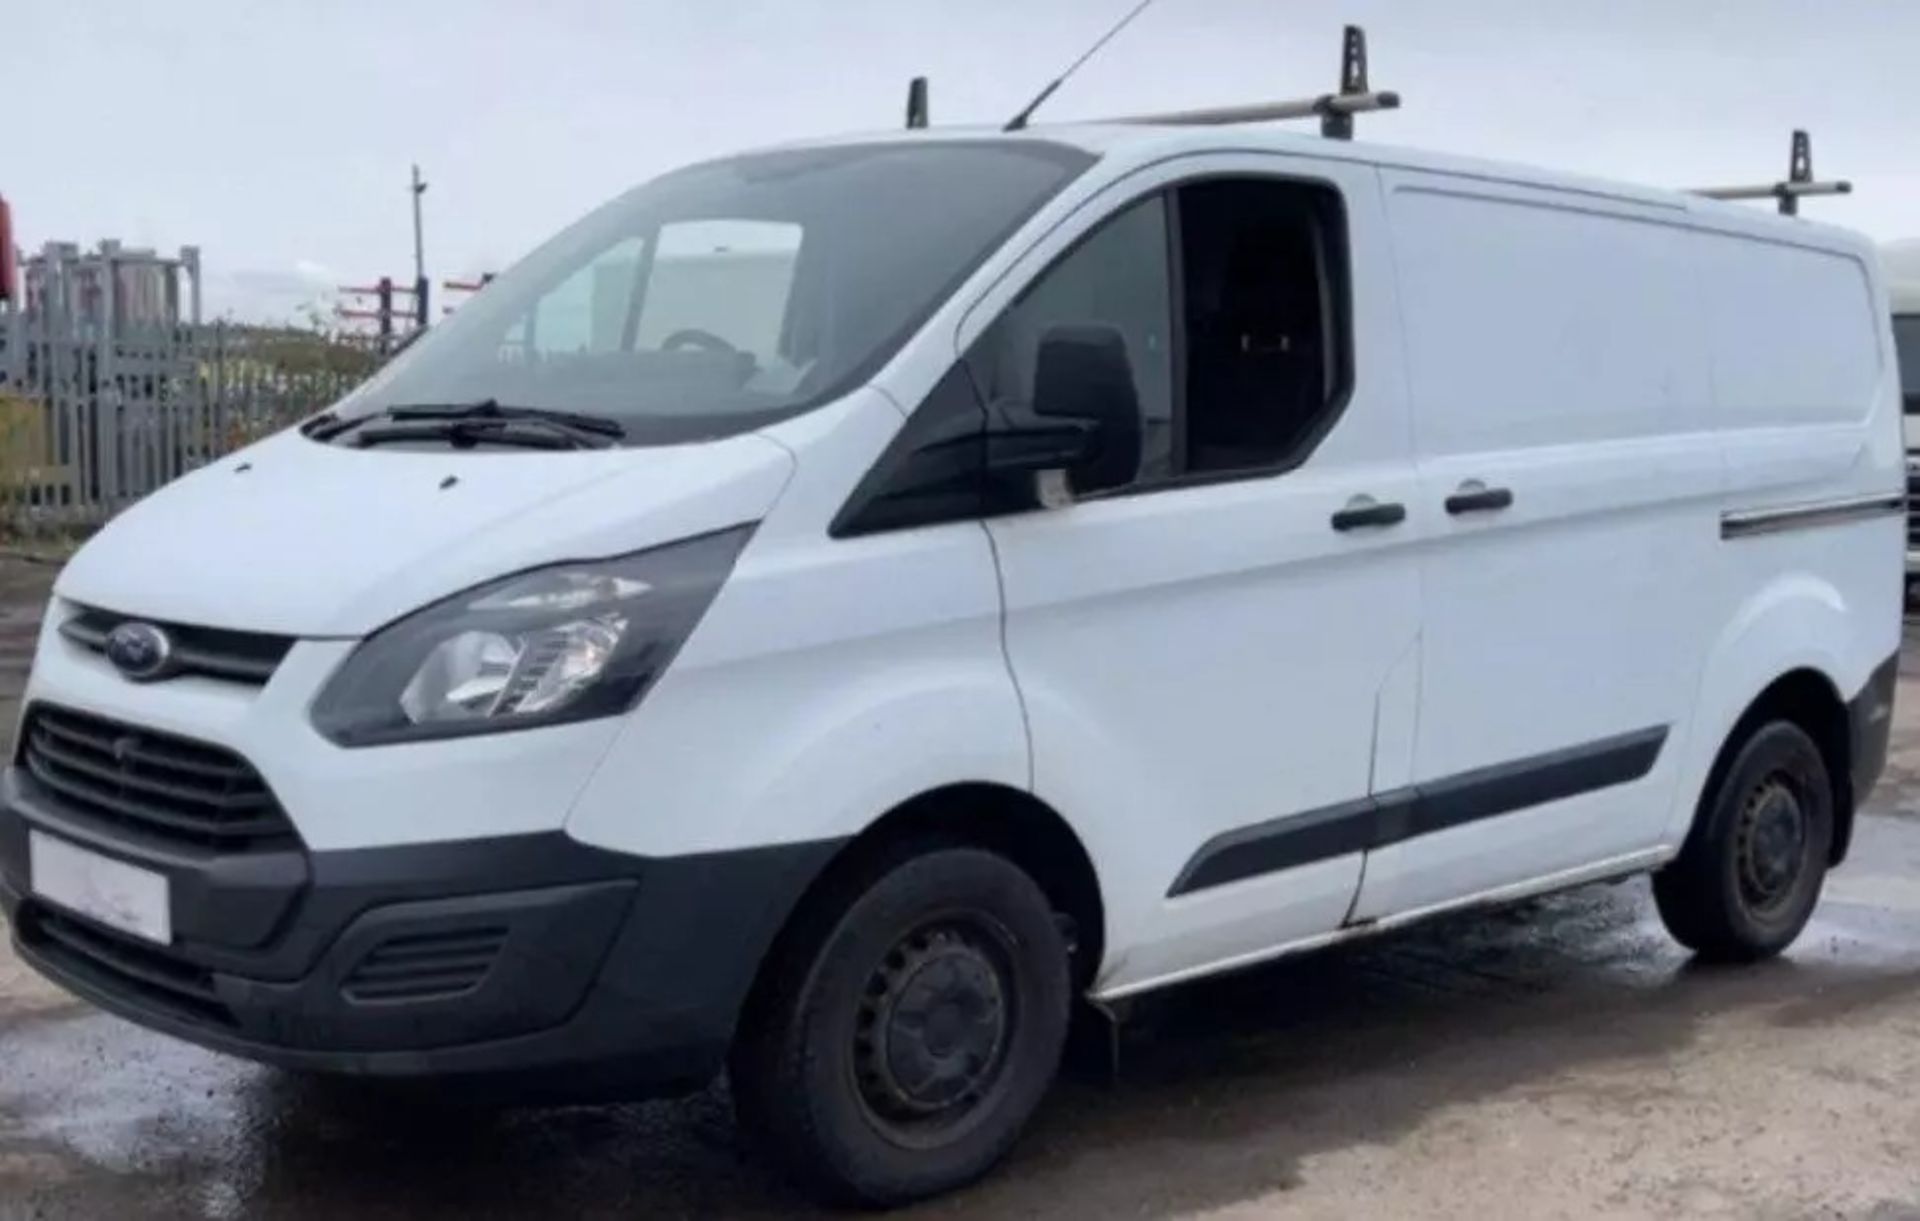 2015 FORD TRANSIT CUSTOM PANEL VAN - RELIABLE, WELL-MAINTAINED, AND READY FOR WORK - Image 2 of 12